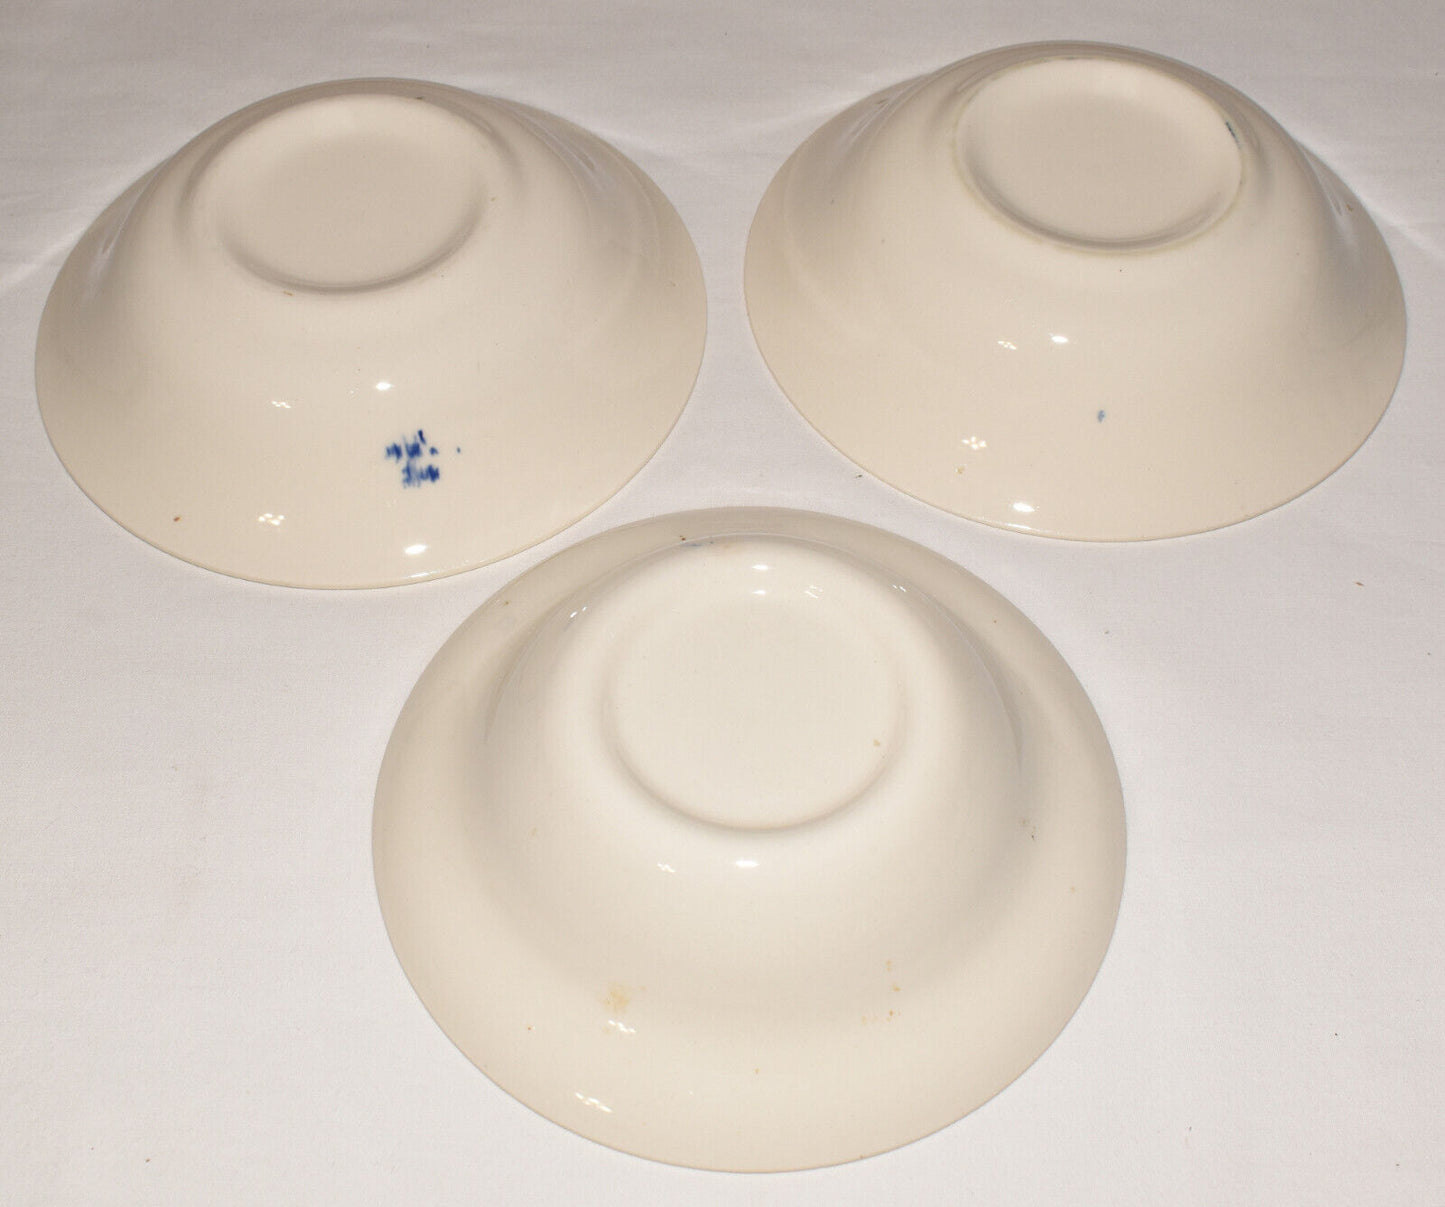 Vintage Blue Willow 6.5" Soup/Cereal Bowls Set of 3 Blue Transferware China Bowls